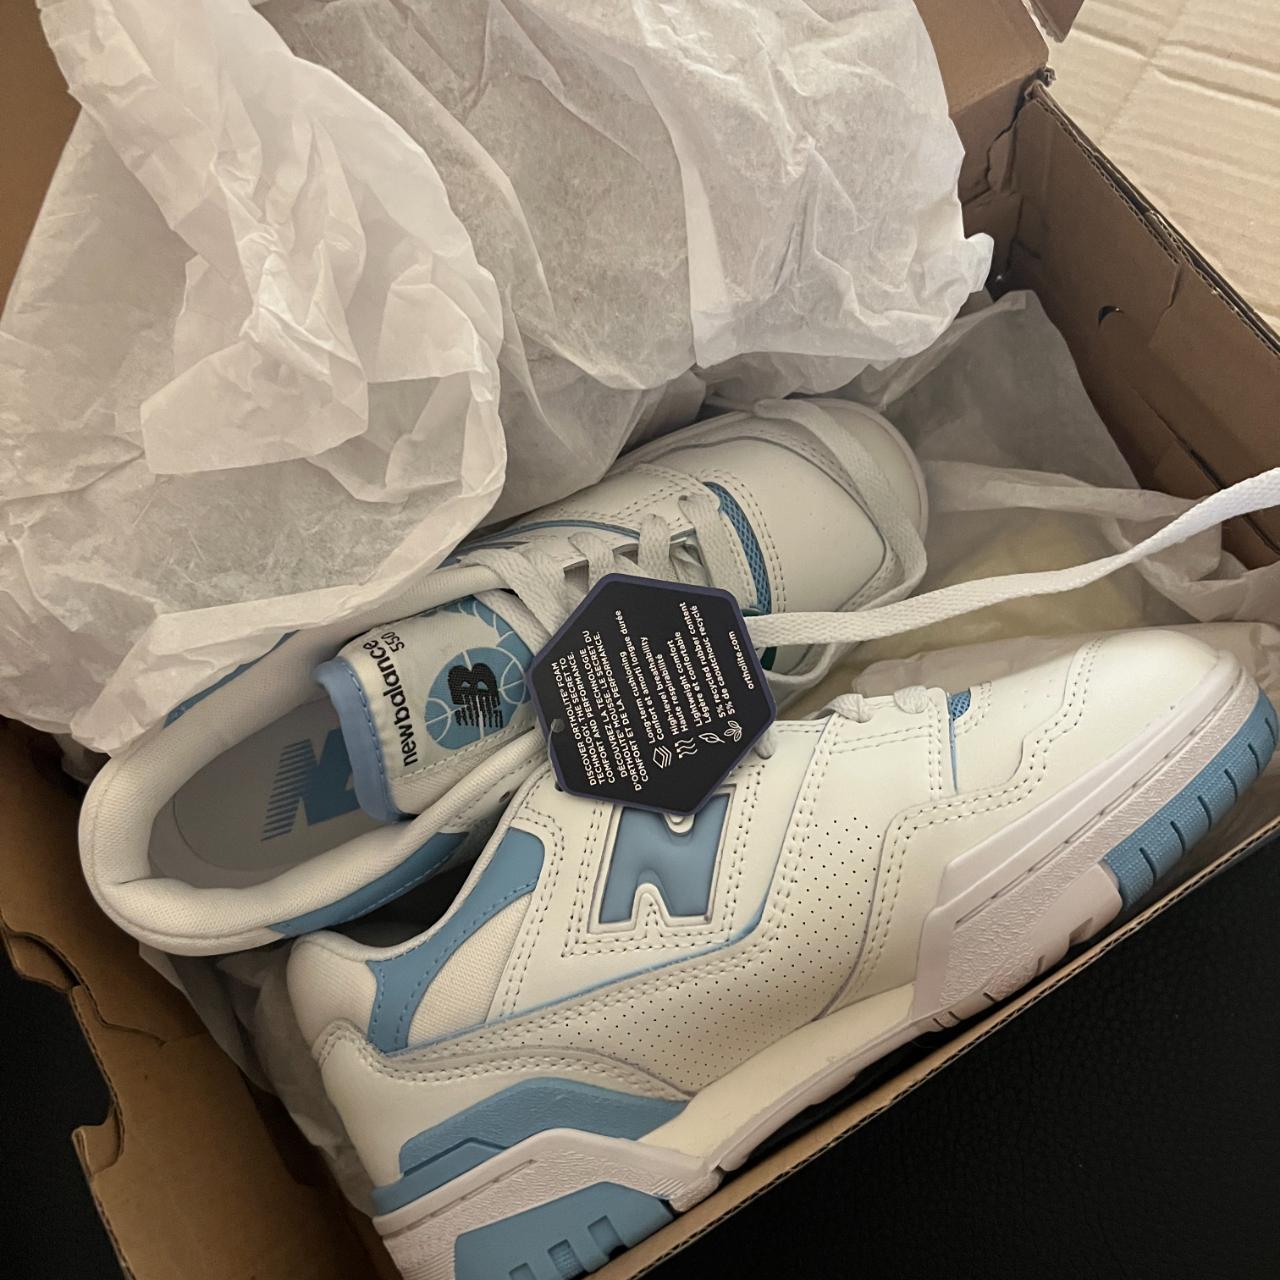 New Balance Women's White and Blue Trainers (4)